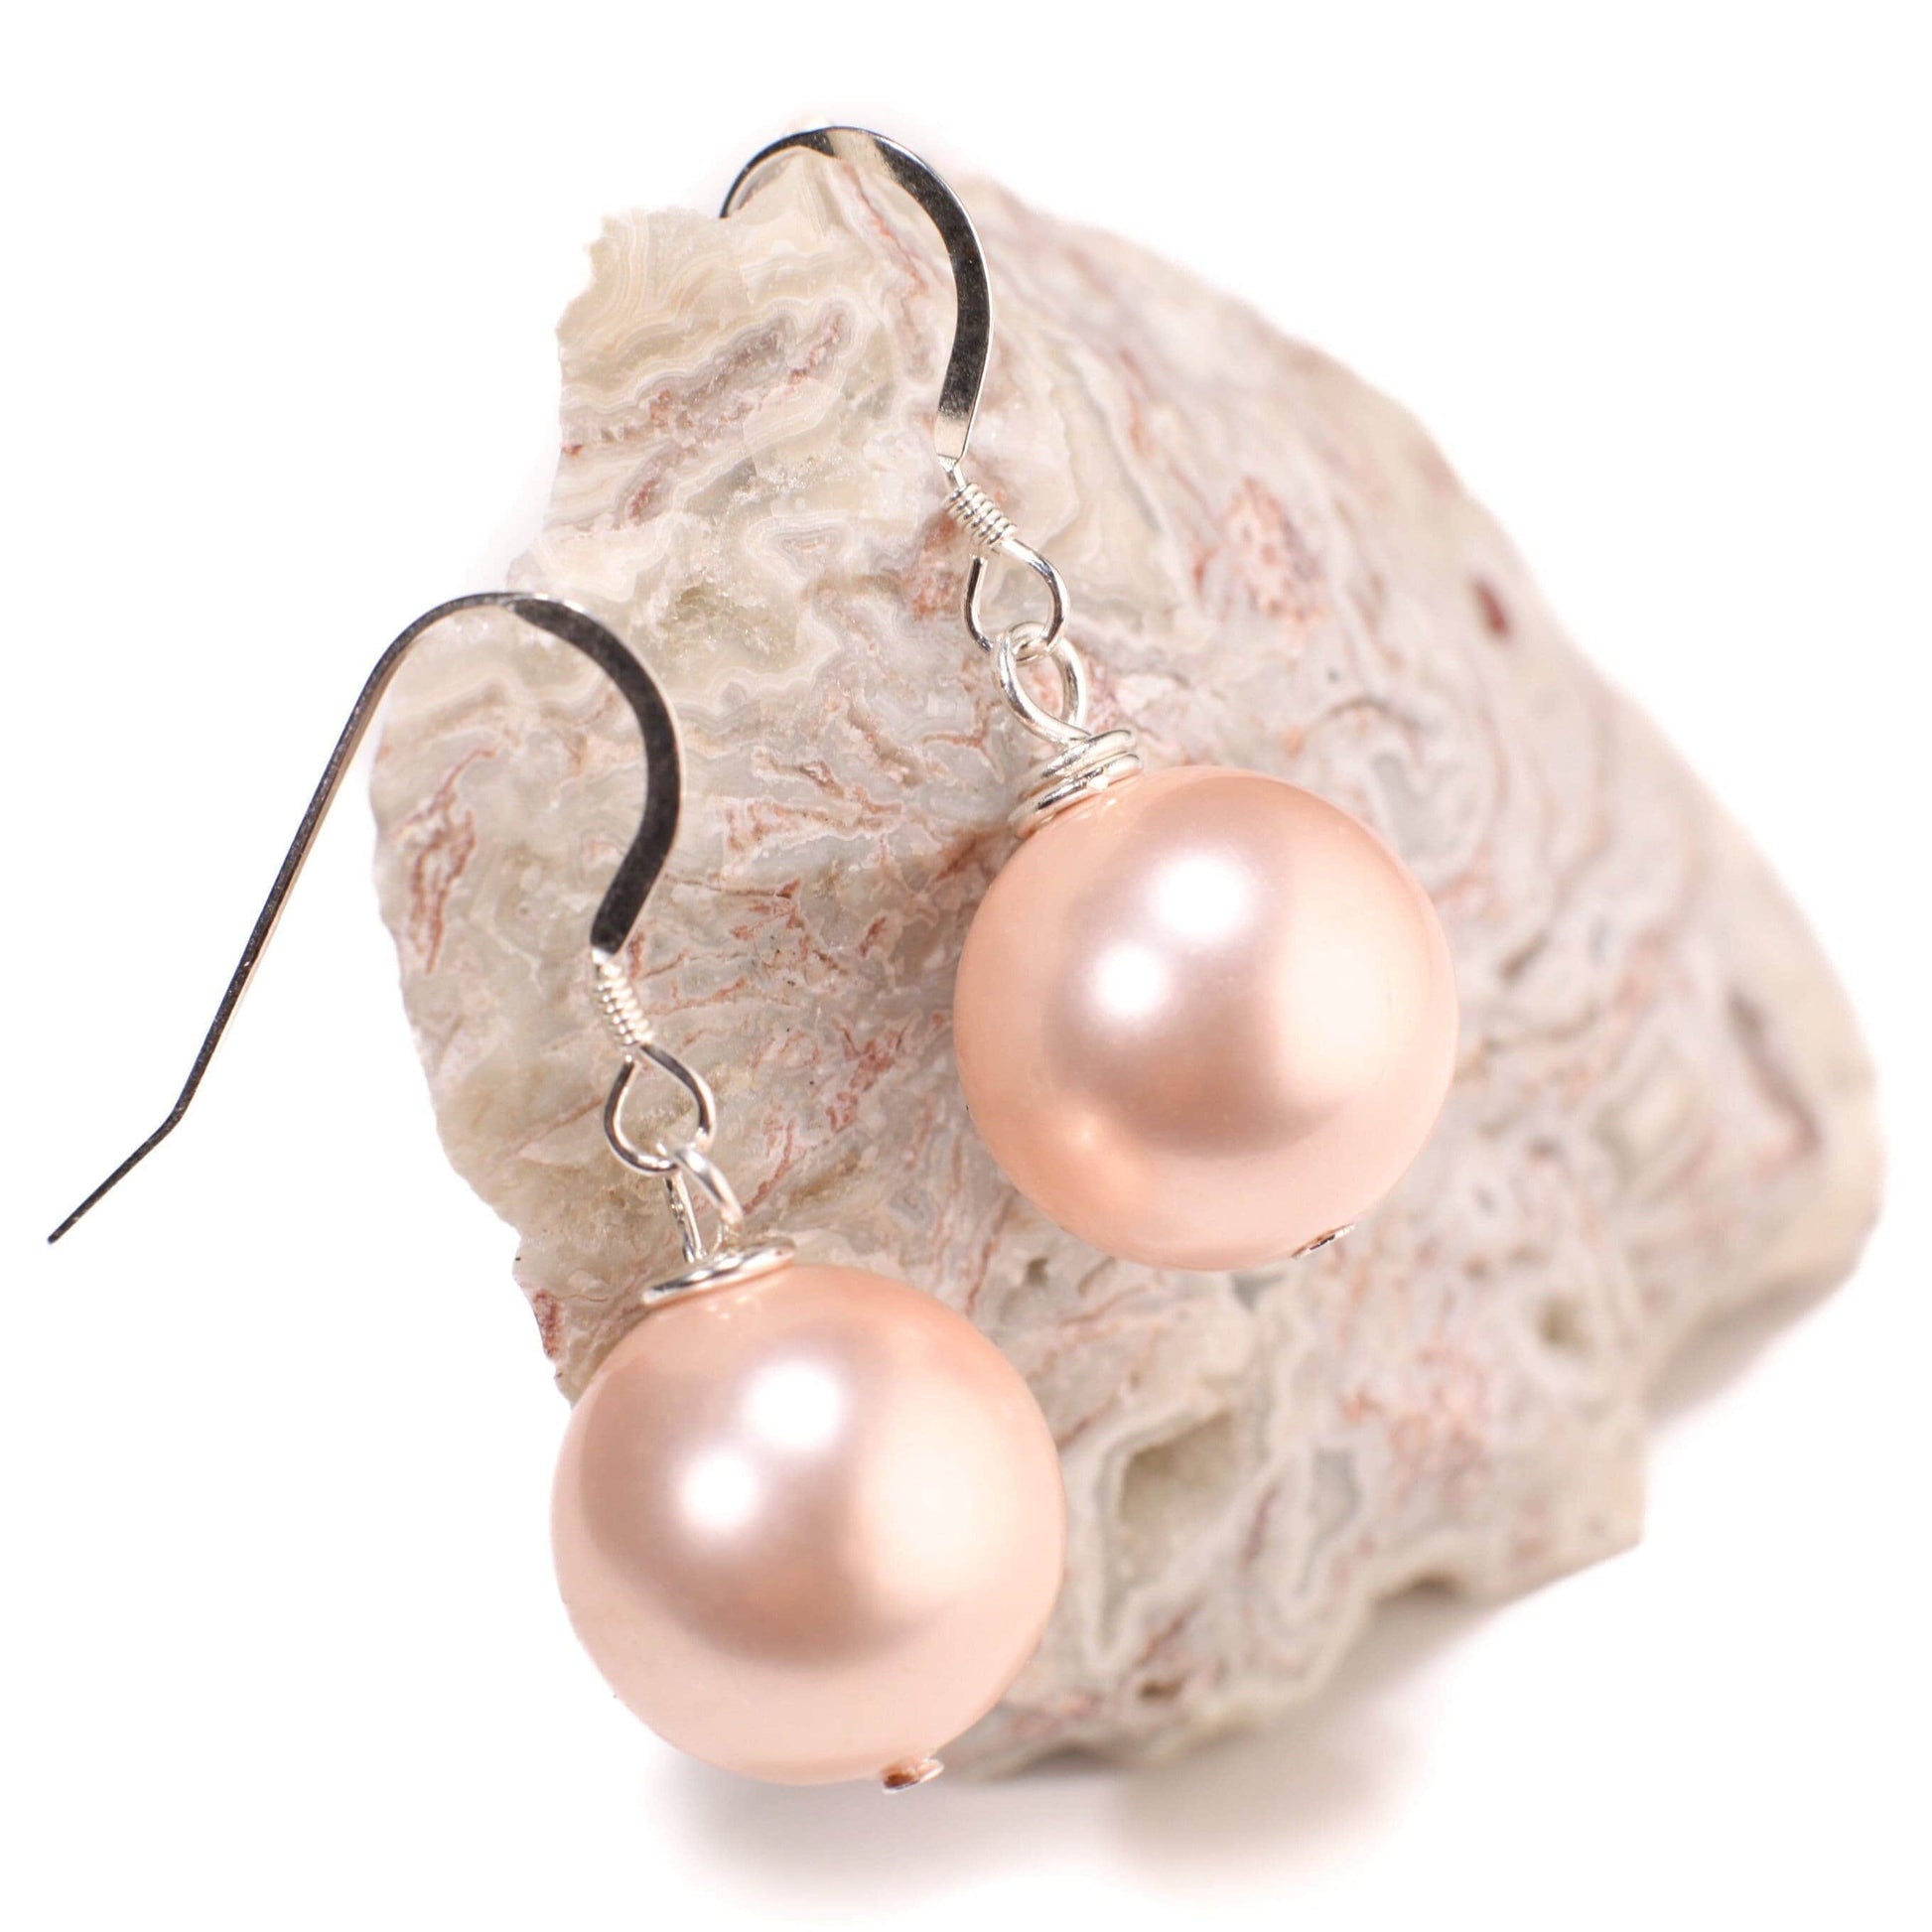 Pink South Sea Shell Pearl 14mm Large High Luster in 925 Sterling Silver Ear Wire or Leverback Earrings, Bridal, Gift for Her